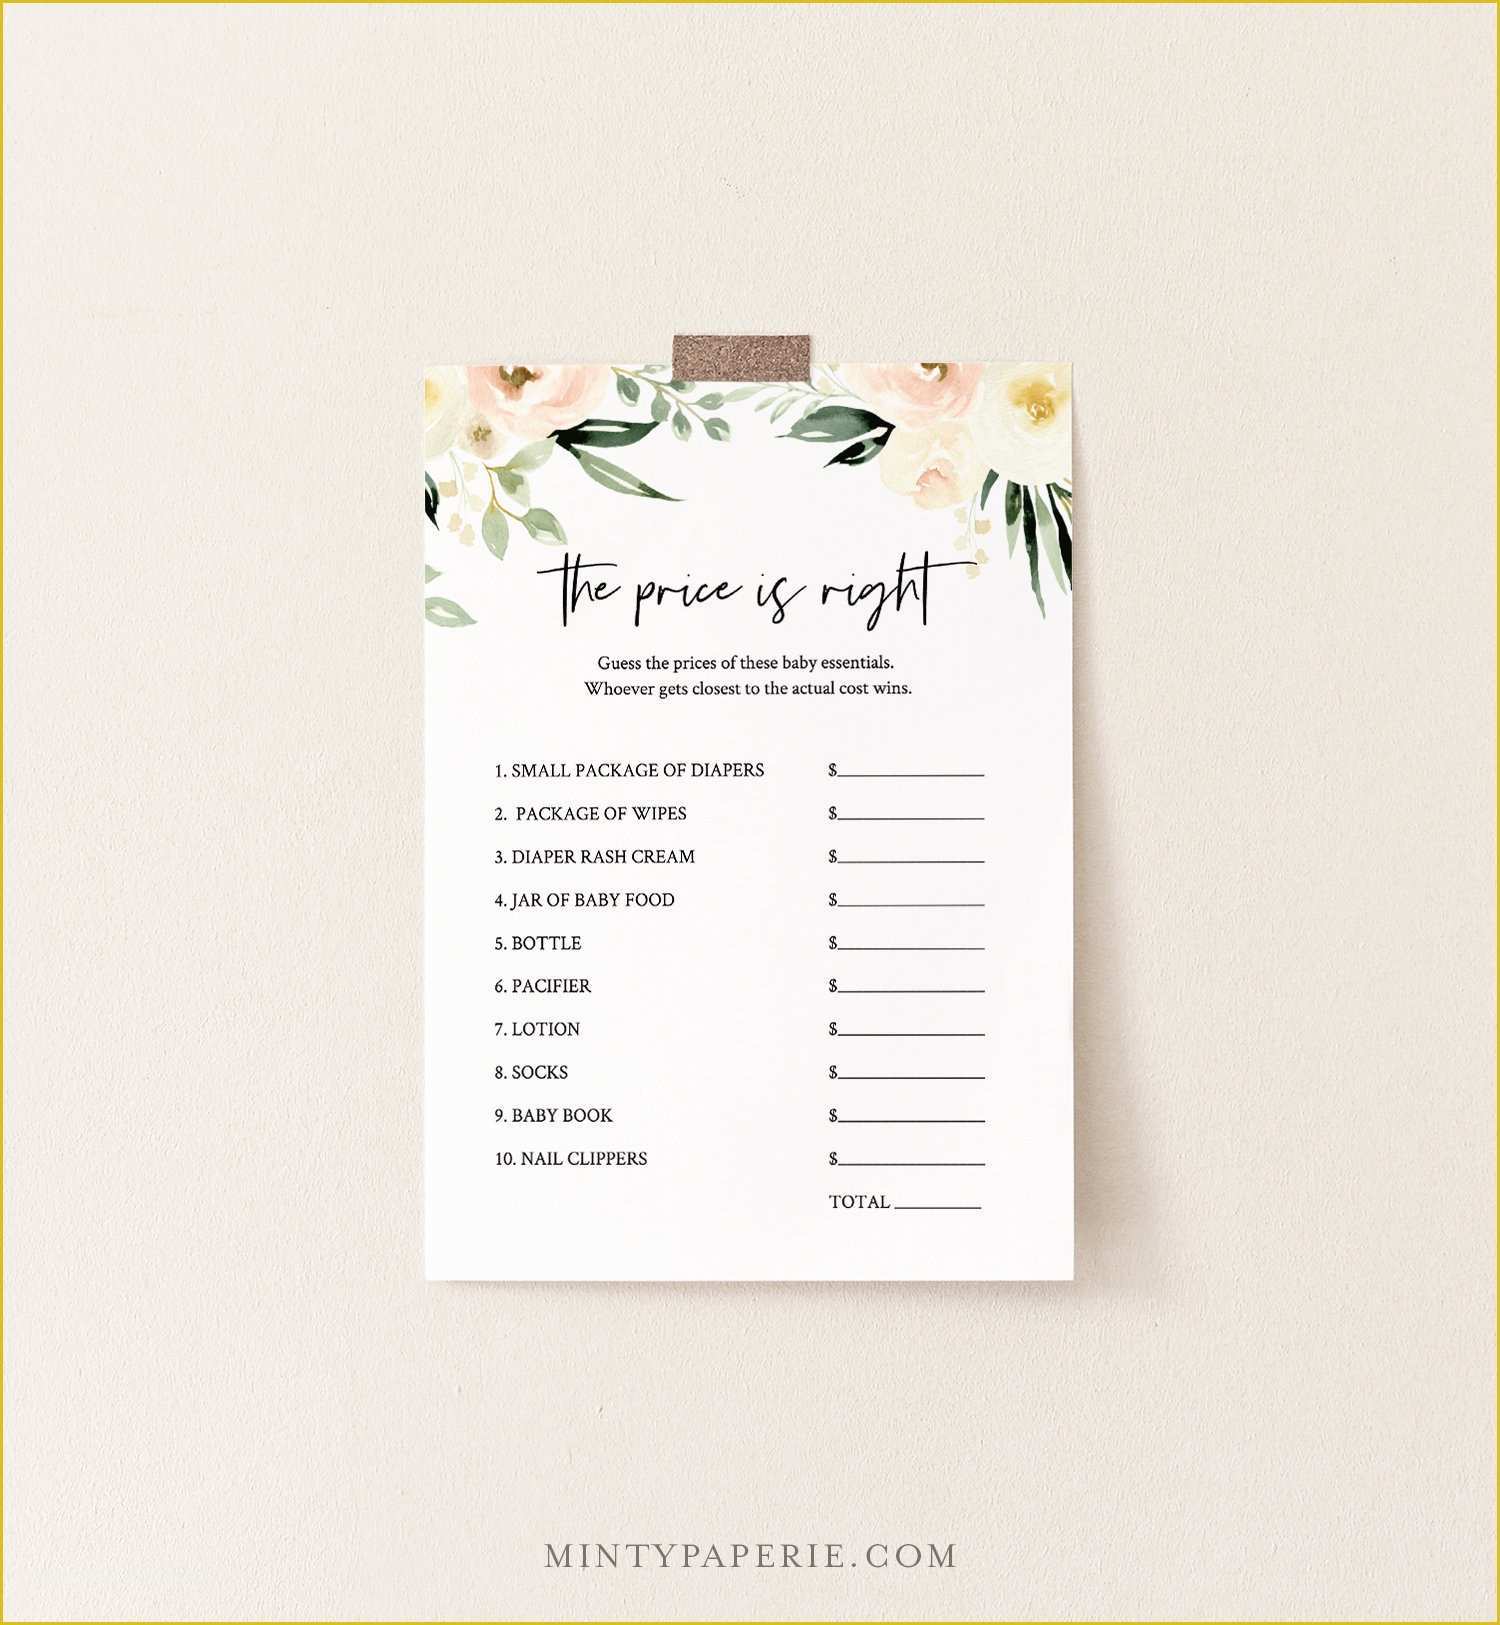 Price is Right Baby Shower Game Free Template Of the Price is Right Baby Shower Game Template Peach Floral